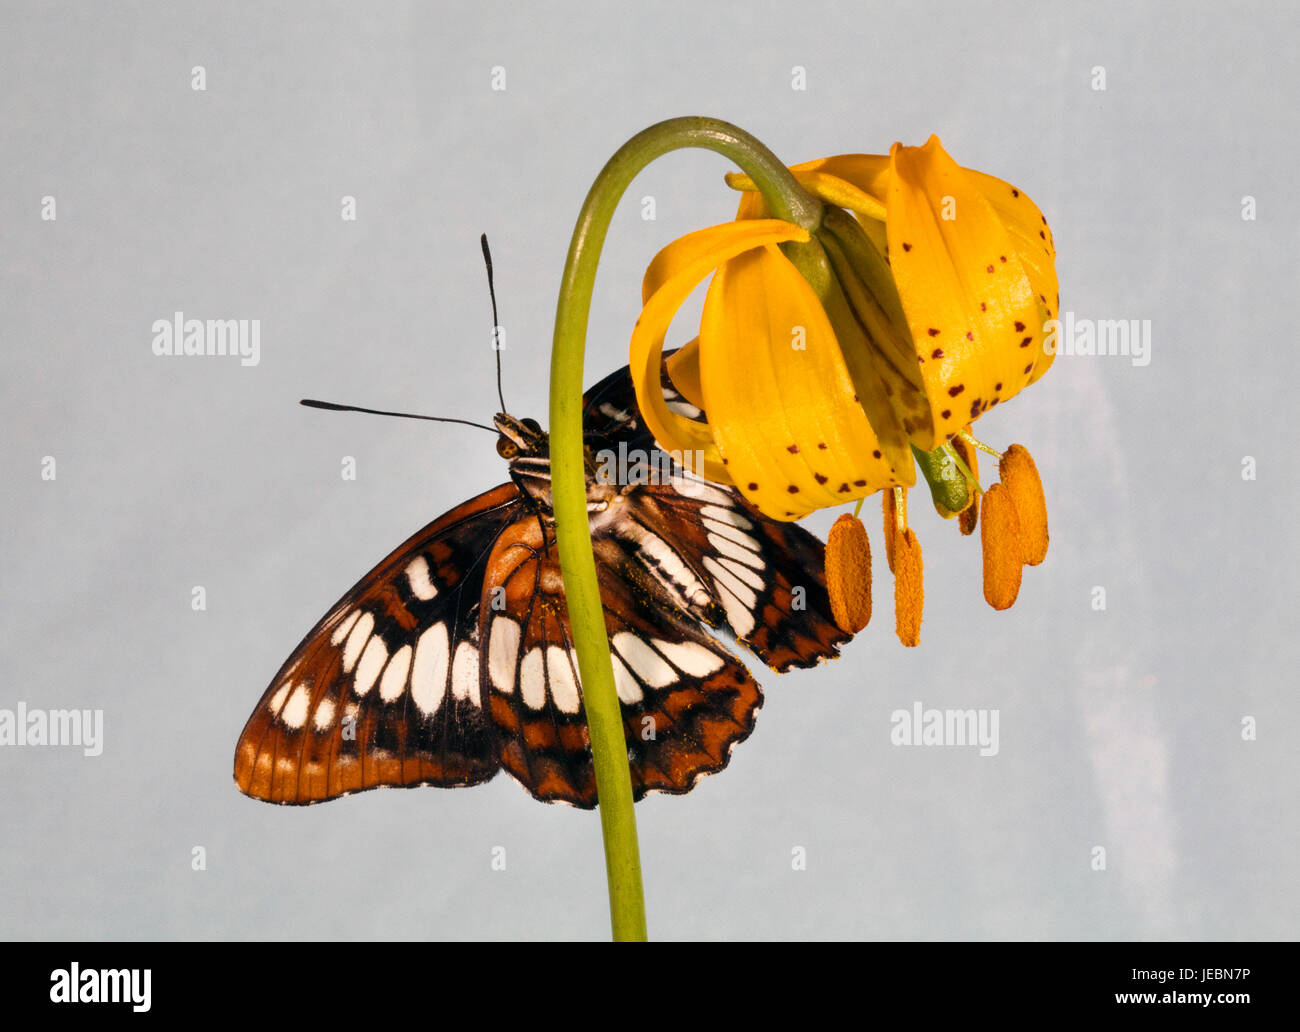 A Lorquin's Admiral butterfly, Limenitis lorquini,  alighted on a Columbian lily wildflower. Stock Photo